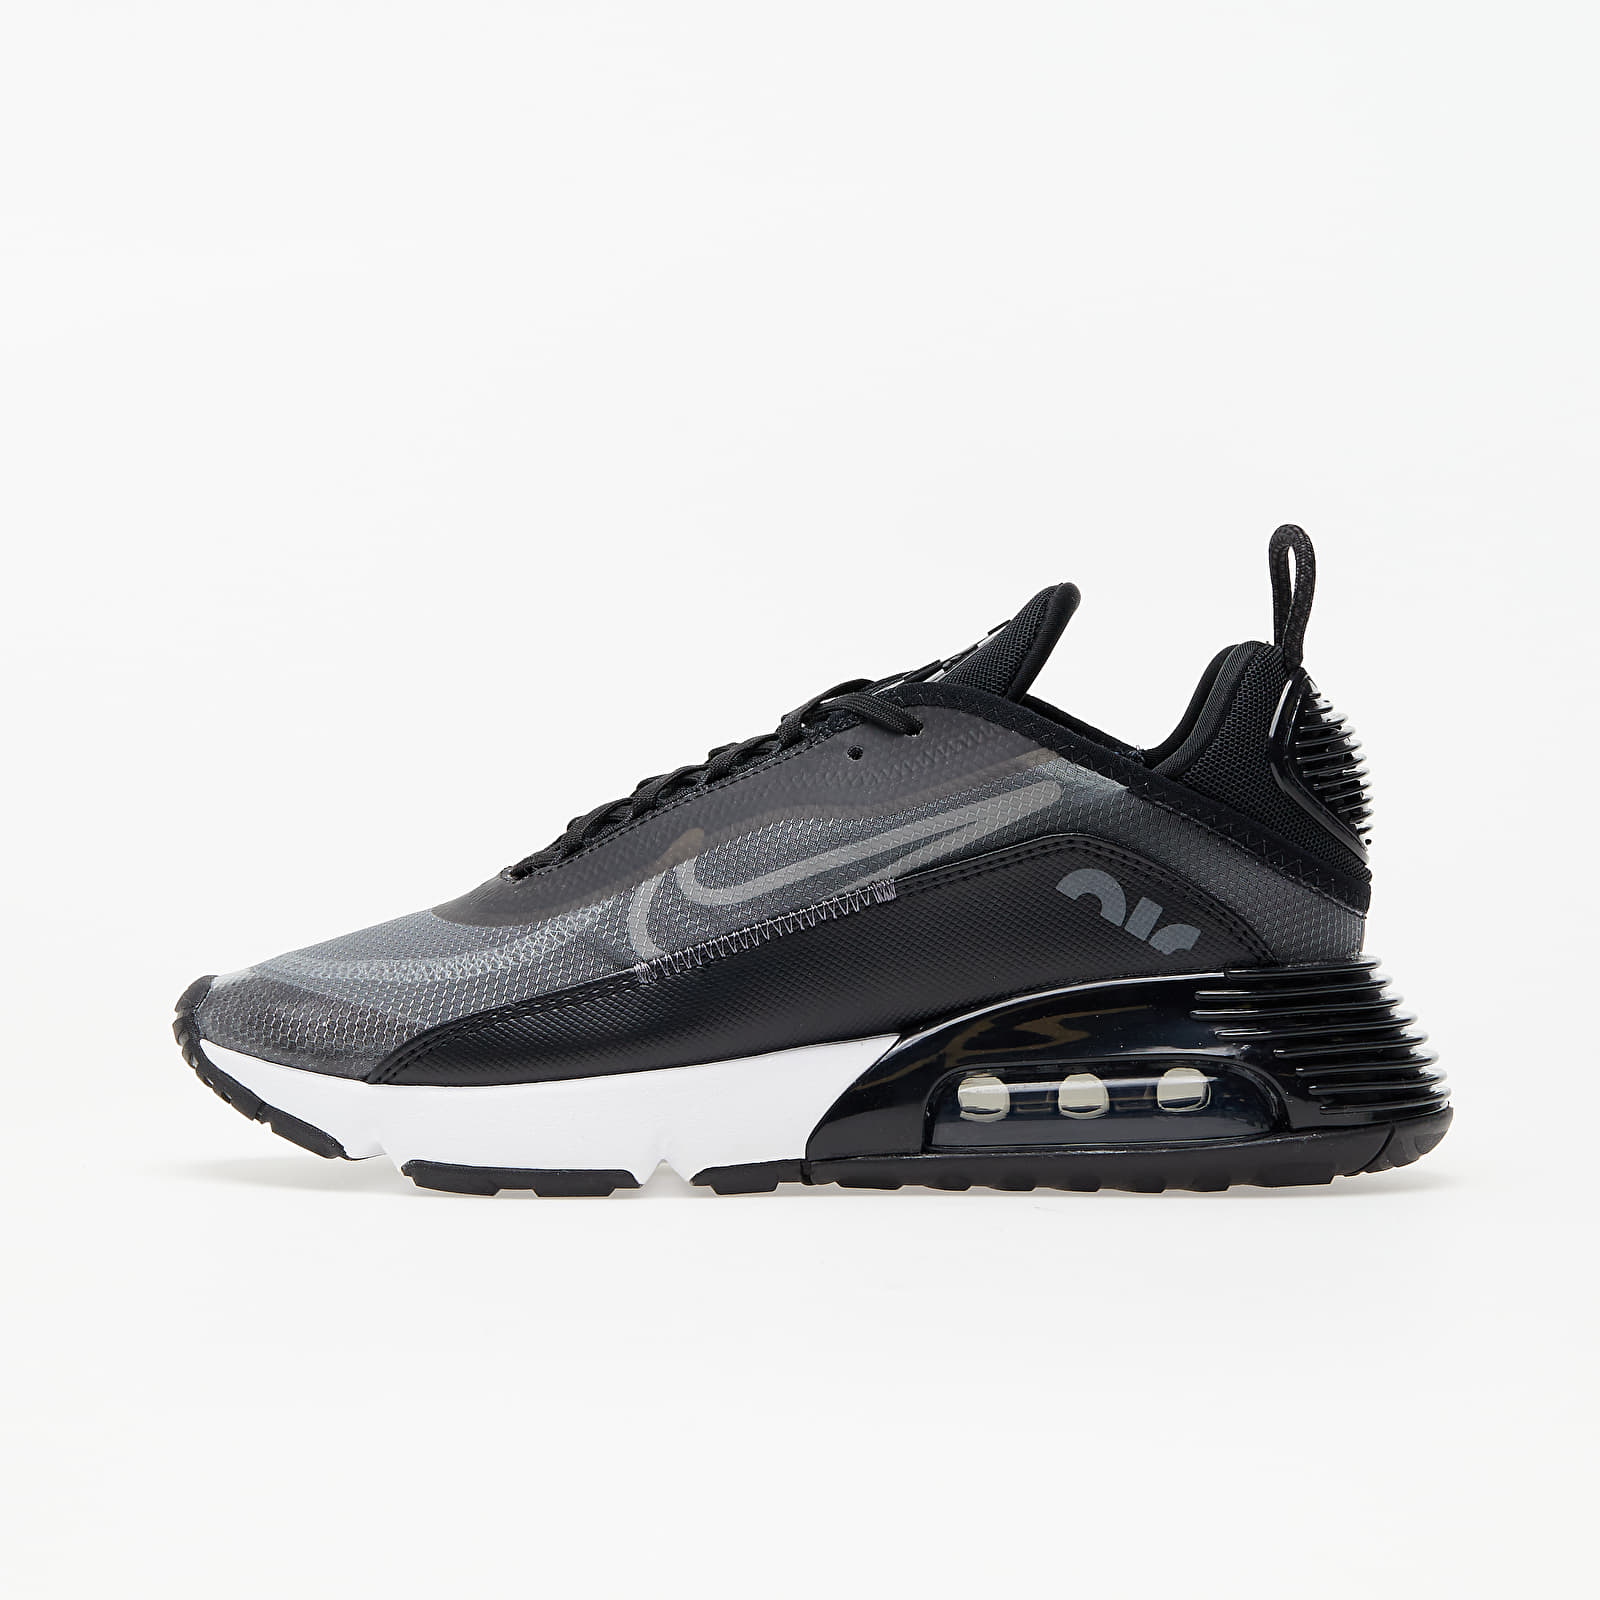 Men's shoes Nike Air Max 2090 Black/ White-Wolf Grey-Anthracite